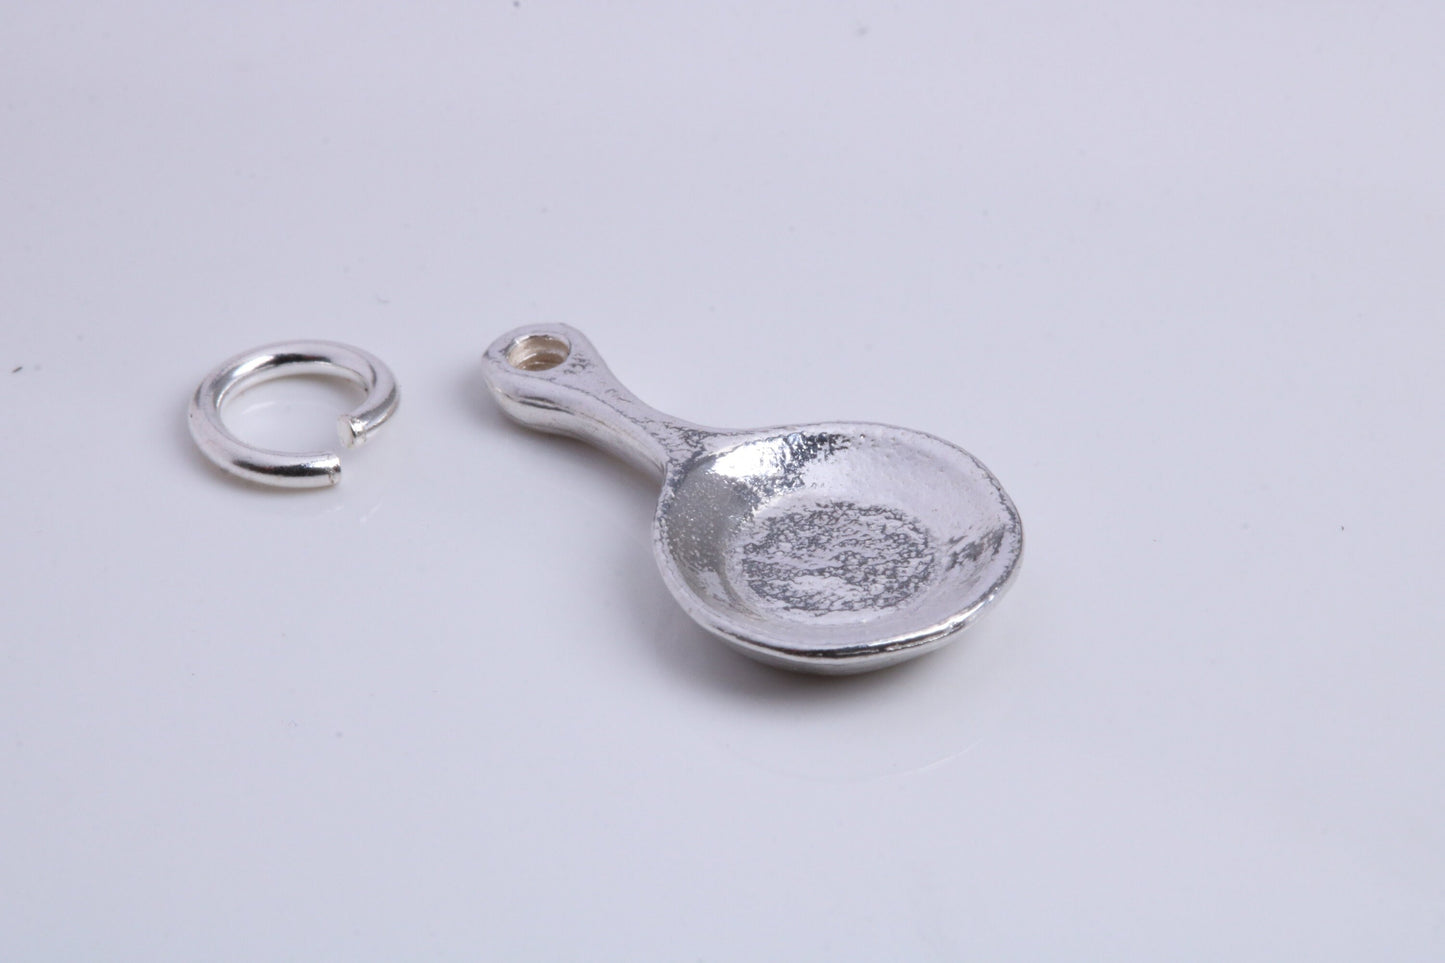 Frying Pan Charm, Traditional Charm, Made from Solid 925 Grade Sterling Silver, Complete with Attachment Link